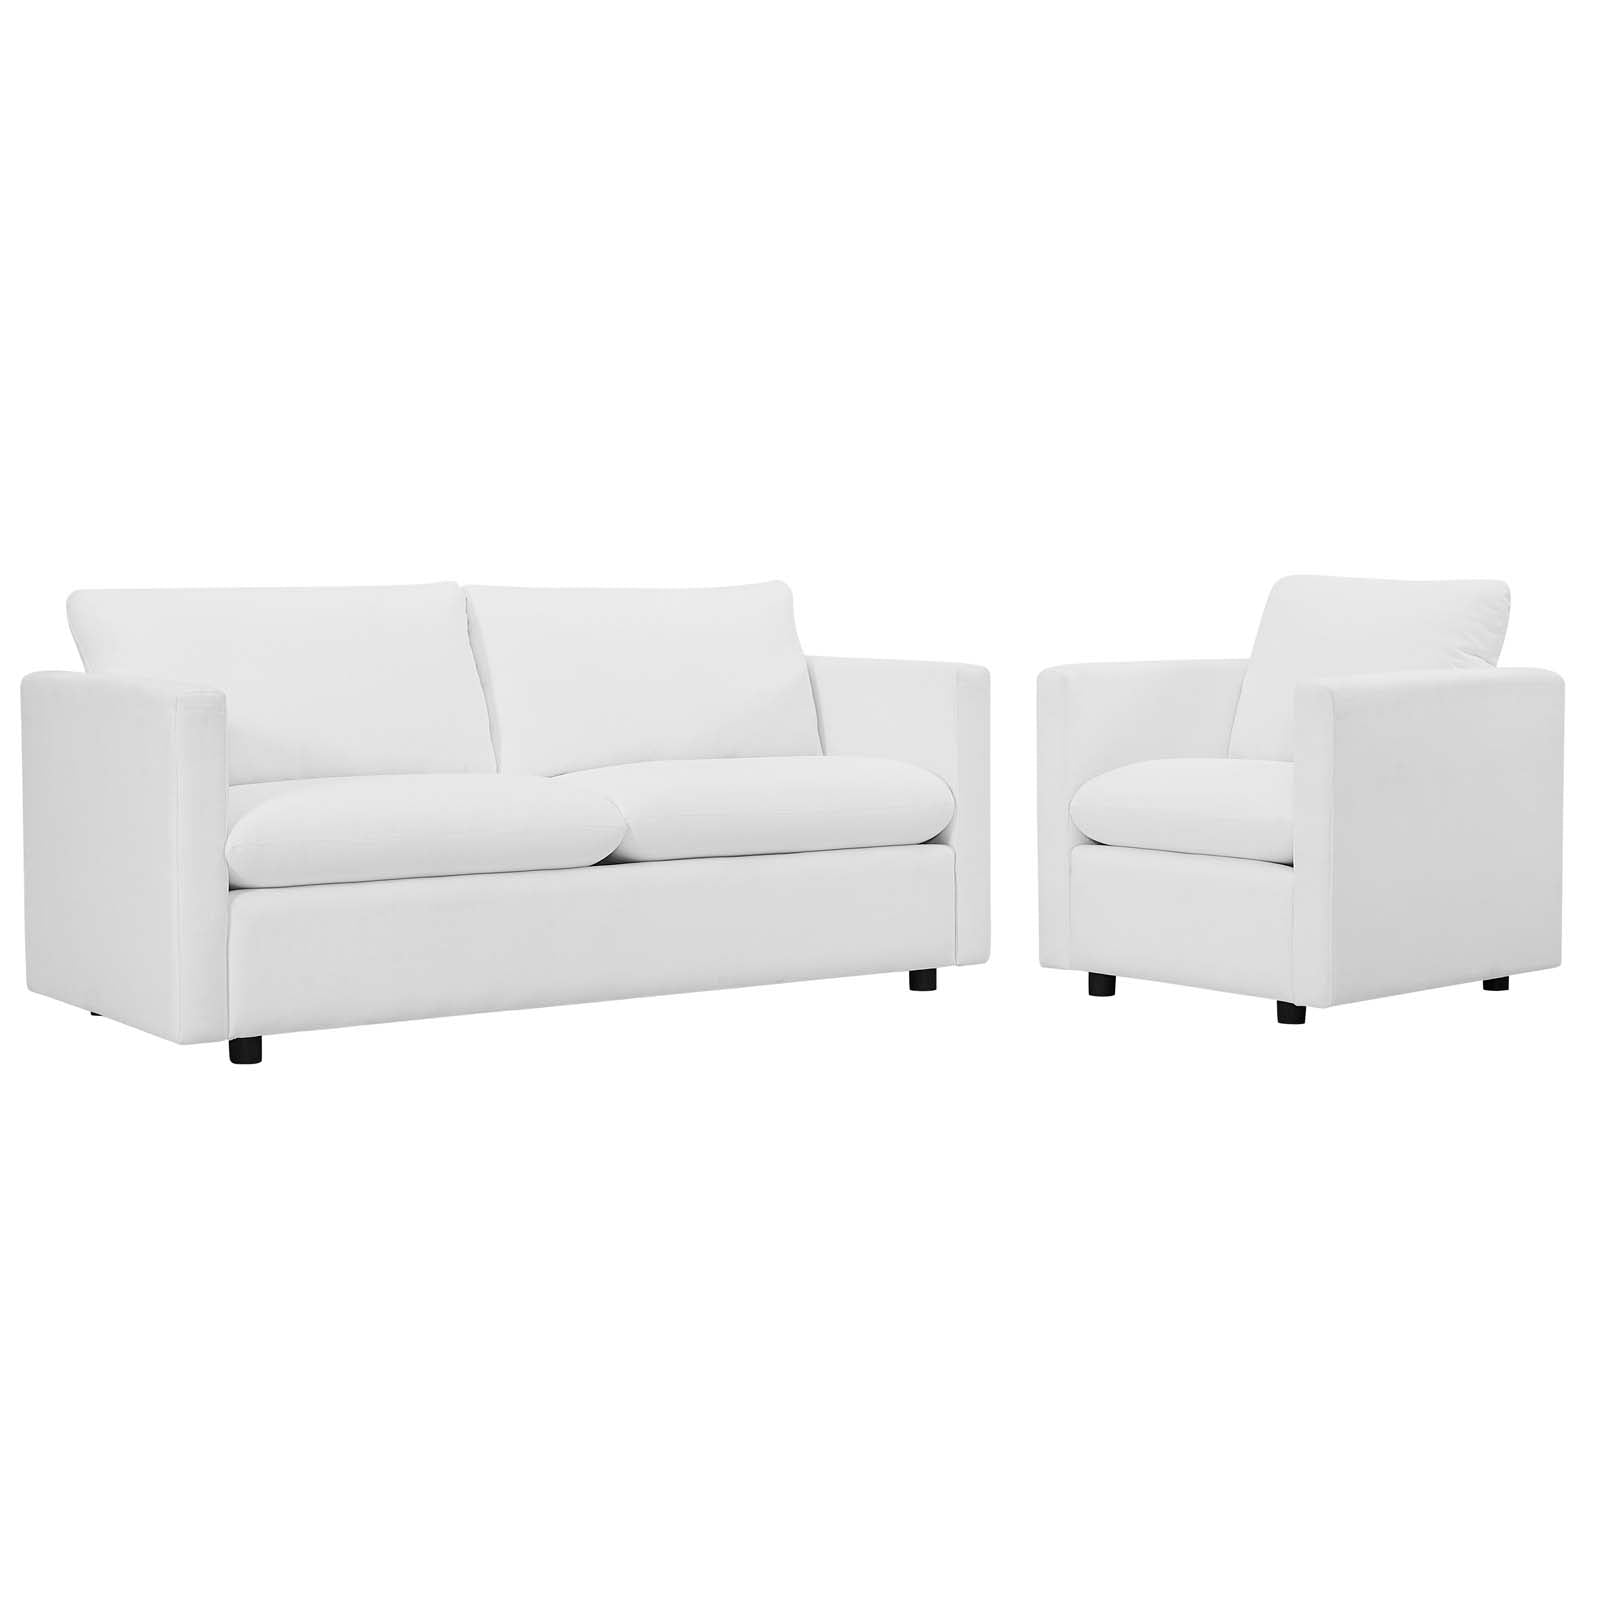 Activate Upholstered Fabric Sofa and Armchair Set - East Shore Modern Home Furnishings